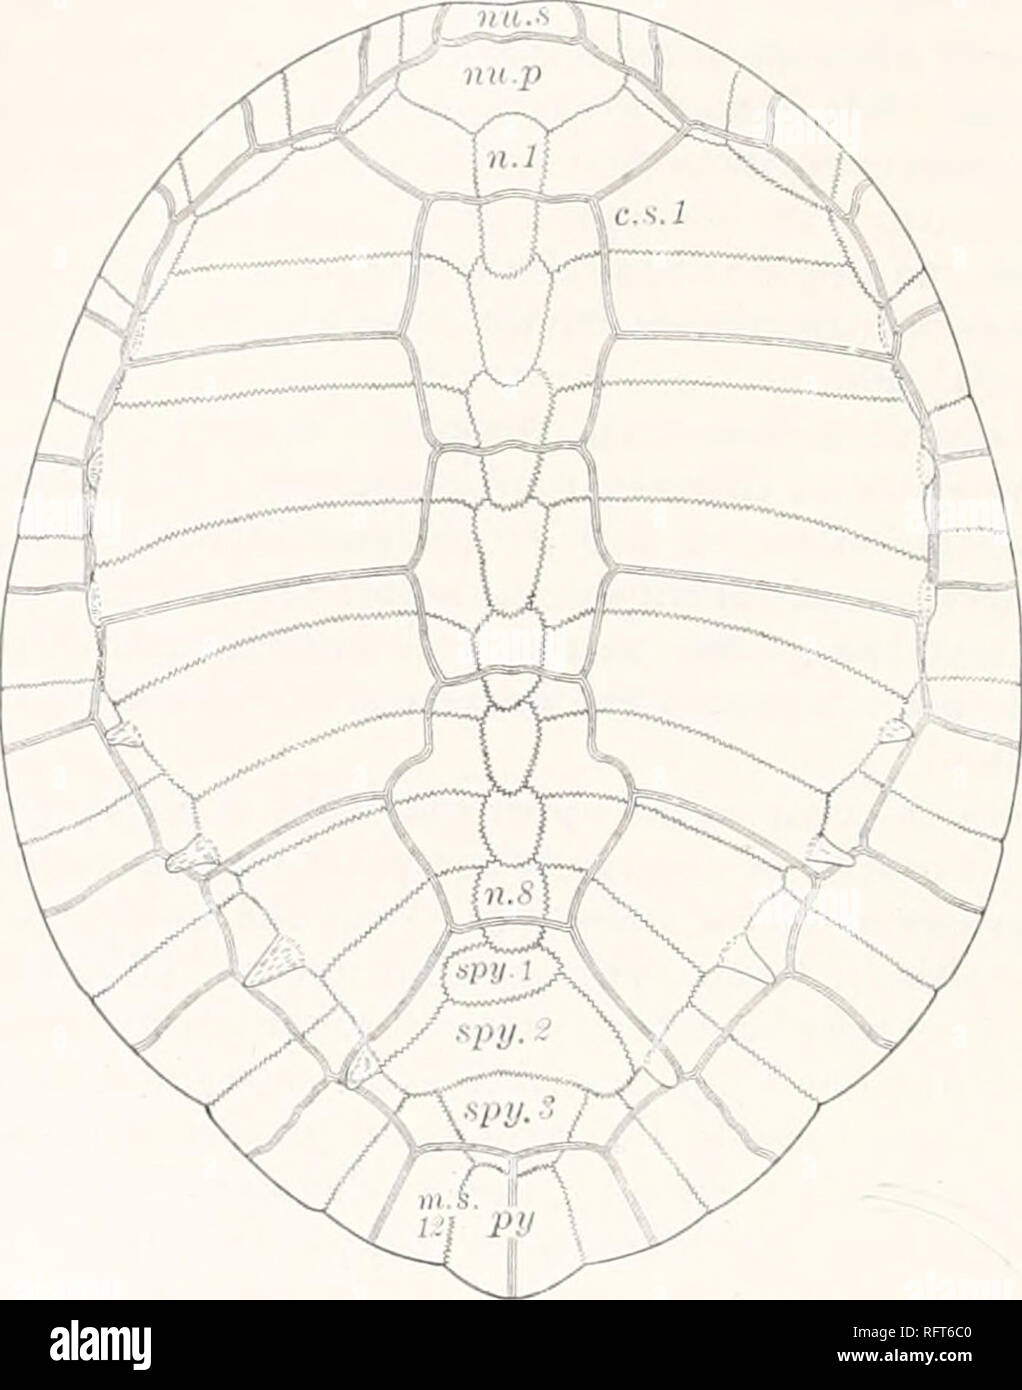 . Carnegie Institution of Washington publication. '32 FOSSIL TURTLES OF NORTH AMERICA. Osteopygis gibbi Wieland. Plate it&gt;, fig. i; plate 27, figs. I, 2; text-figs. 142-146. Osteopygis gibbi, Wieland, Anier. Jour. Sci. (4), XVII, 1904, p. 118, plates v-viii and text-figs. 3-7. The type of this species is No. 783 of the Marsh collection of Yale University. It was obtained from the upper bed of Cretaceous greensand, at Barnesboro, Gloucester County, New Jersey, in 1870. It was originally studied by Dr. George Baur (Zool. Anzeiger, mi, 1889, p. 42), who determined from it that Cope had been in Stock Photo